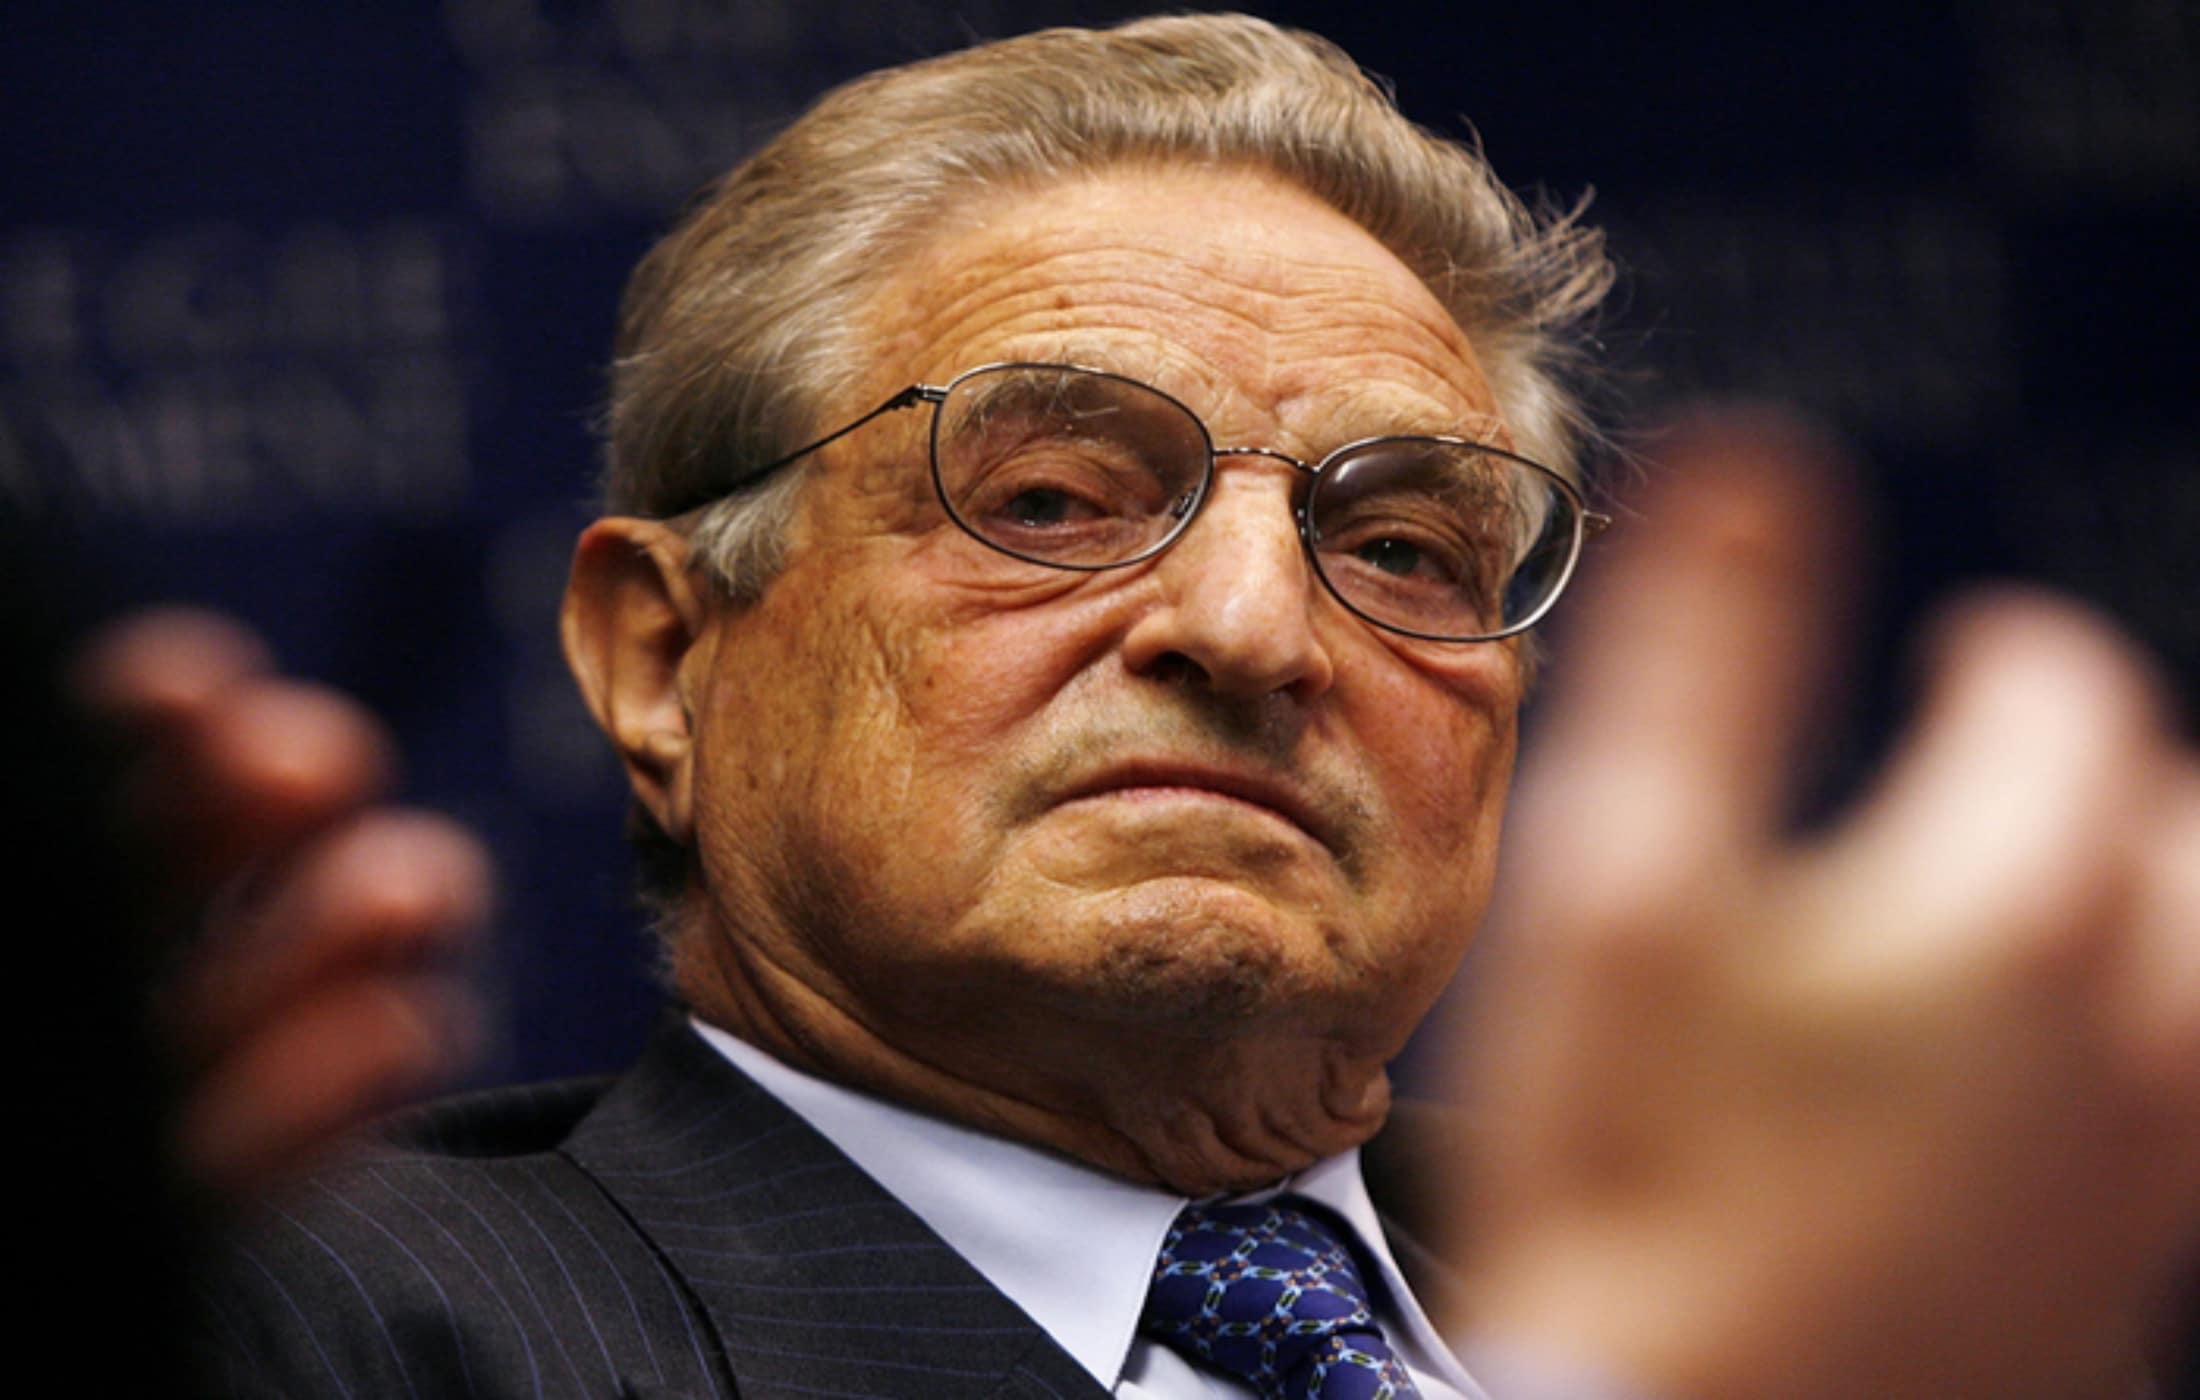 George Soros age, net worth, wiki, family, biography and latest updates